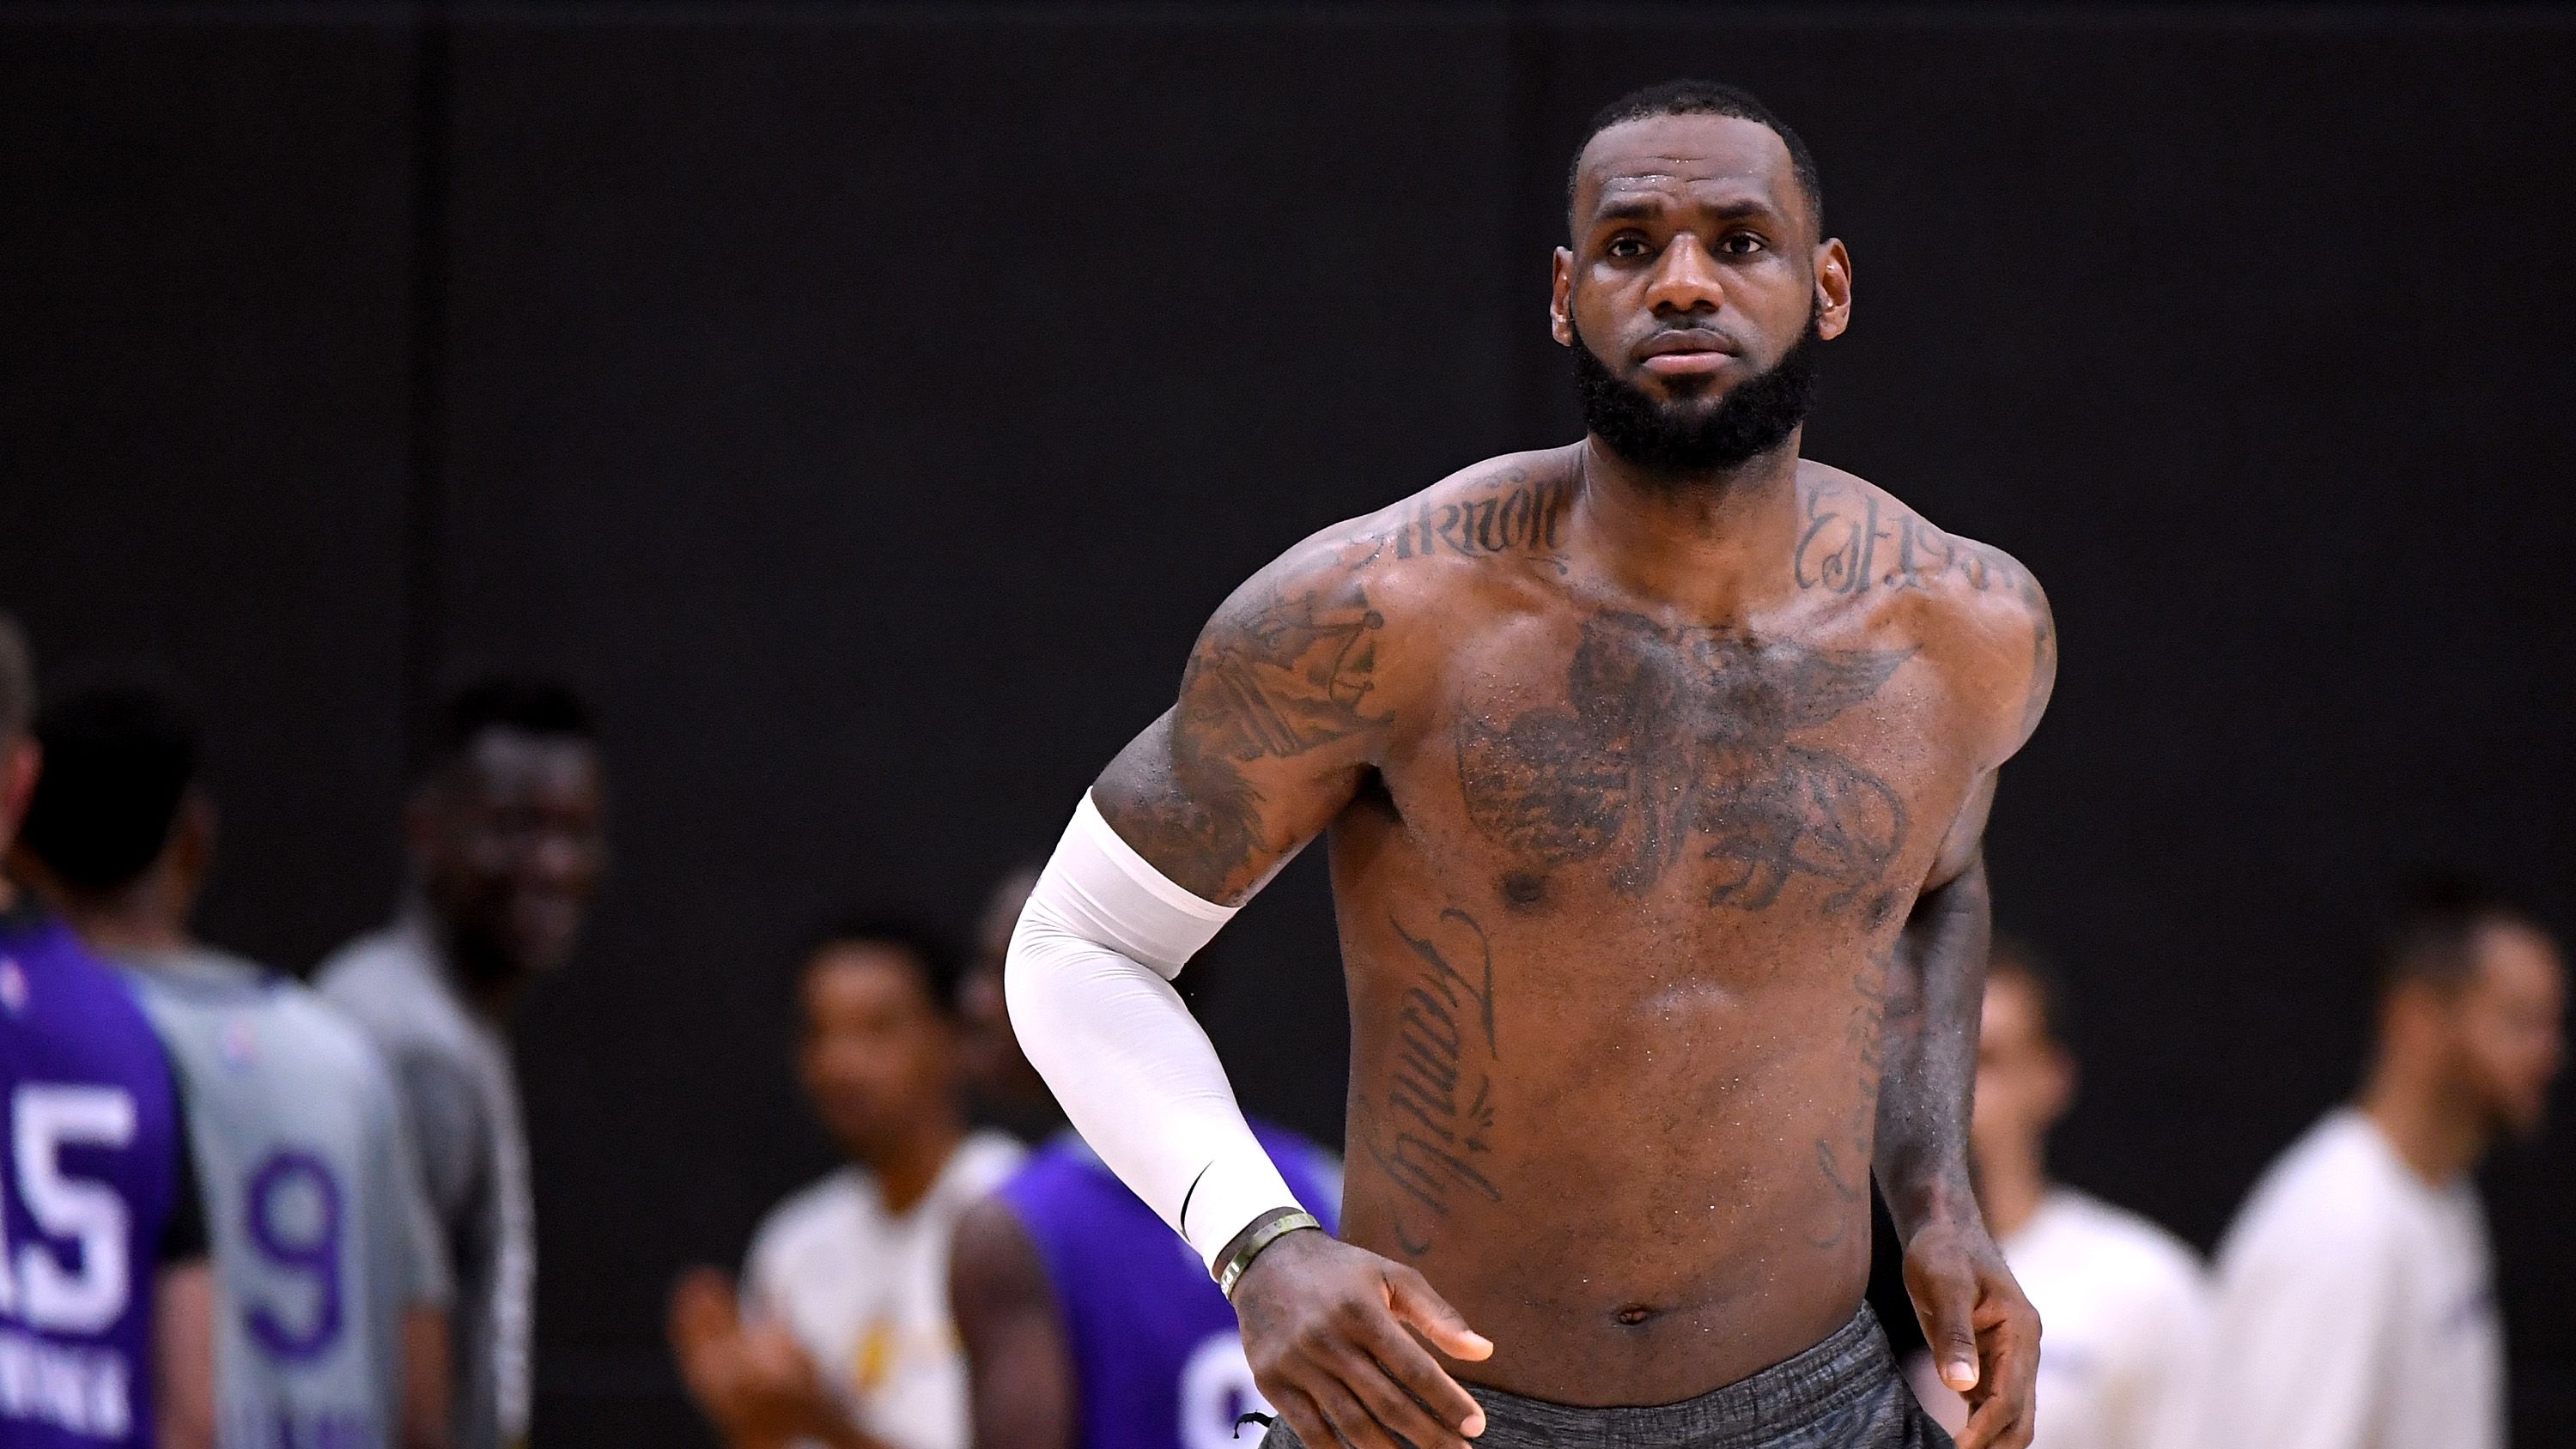 Why Adding Muscle Can Be Bad for NBA Players